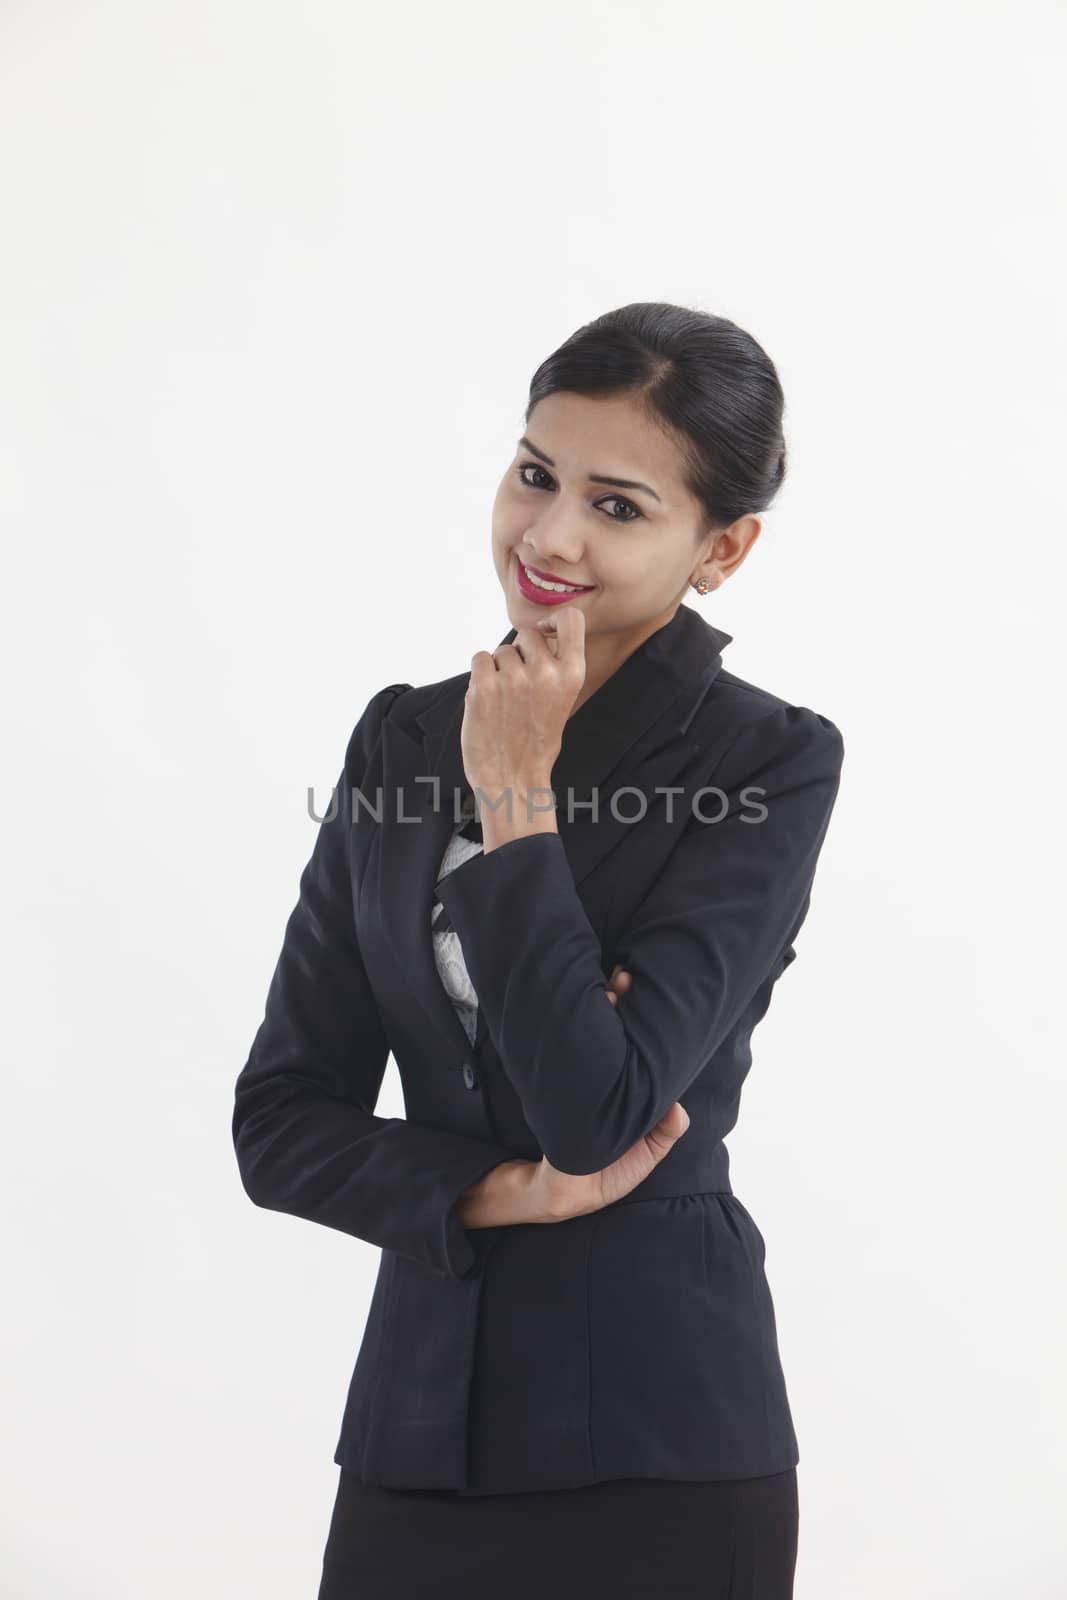 Close up portrait of a smiling business woman thinking on isolated white background